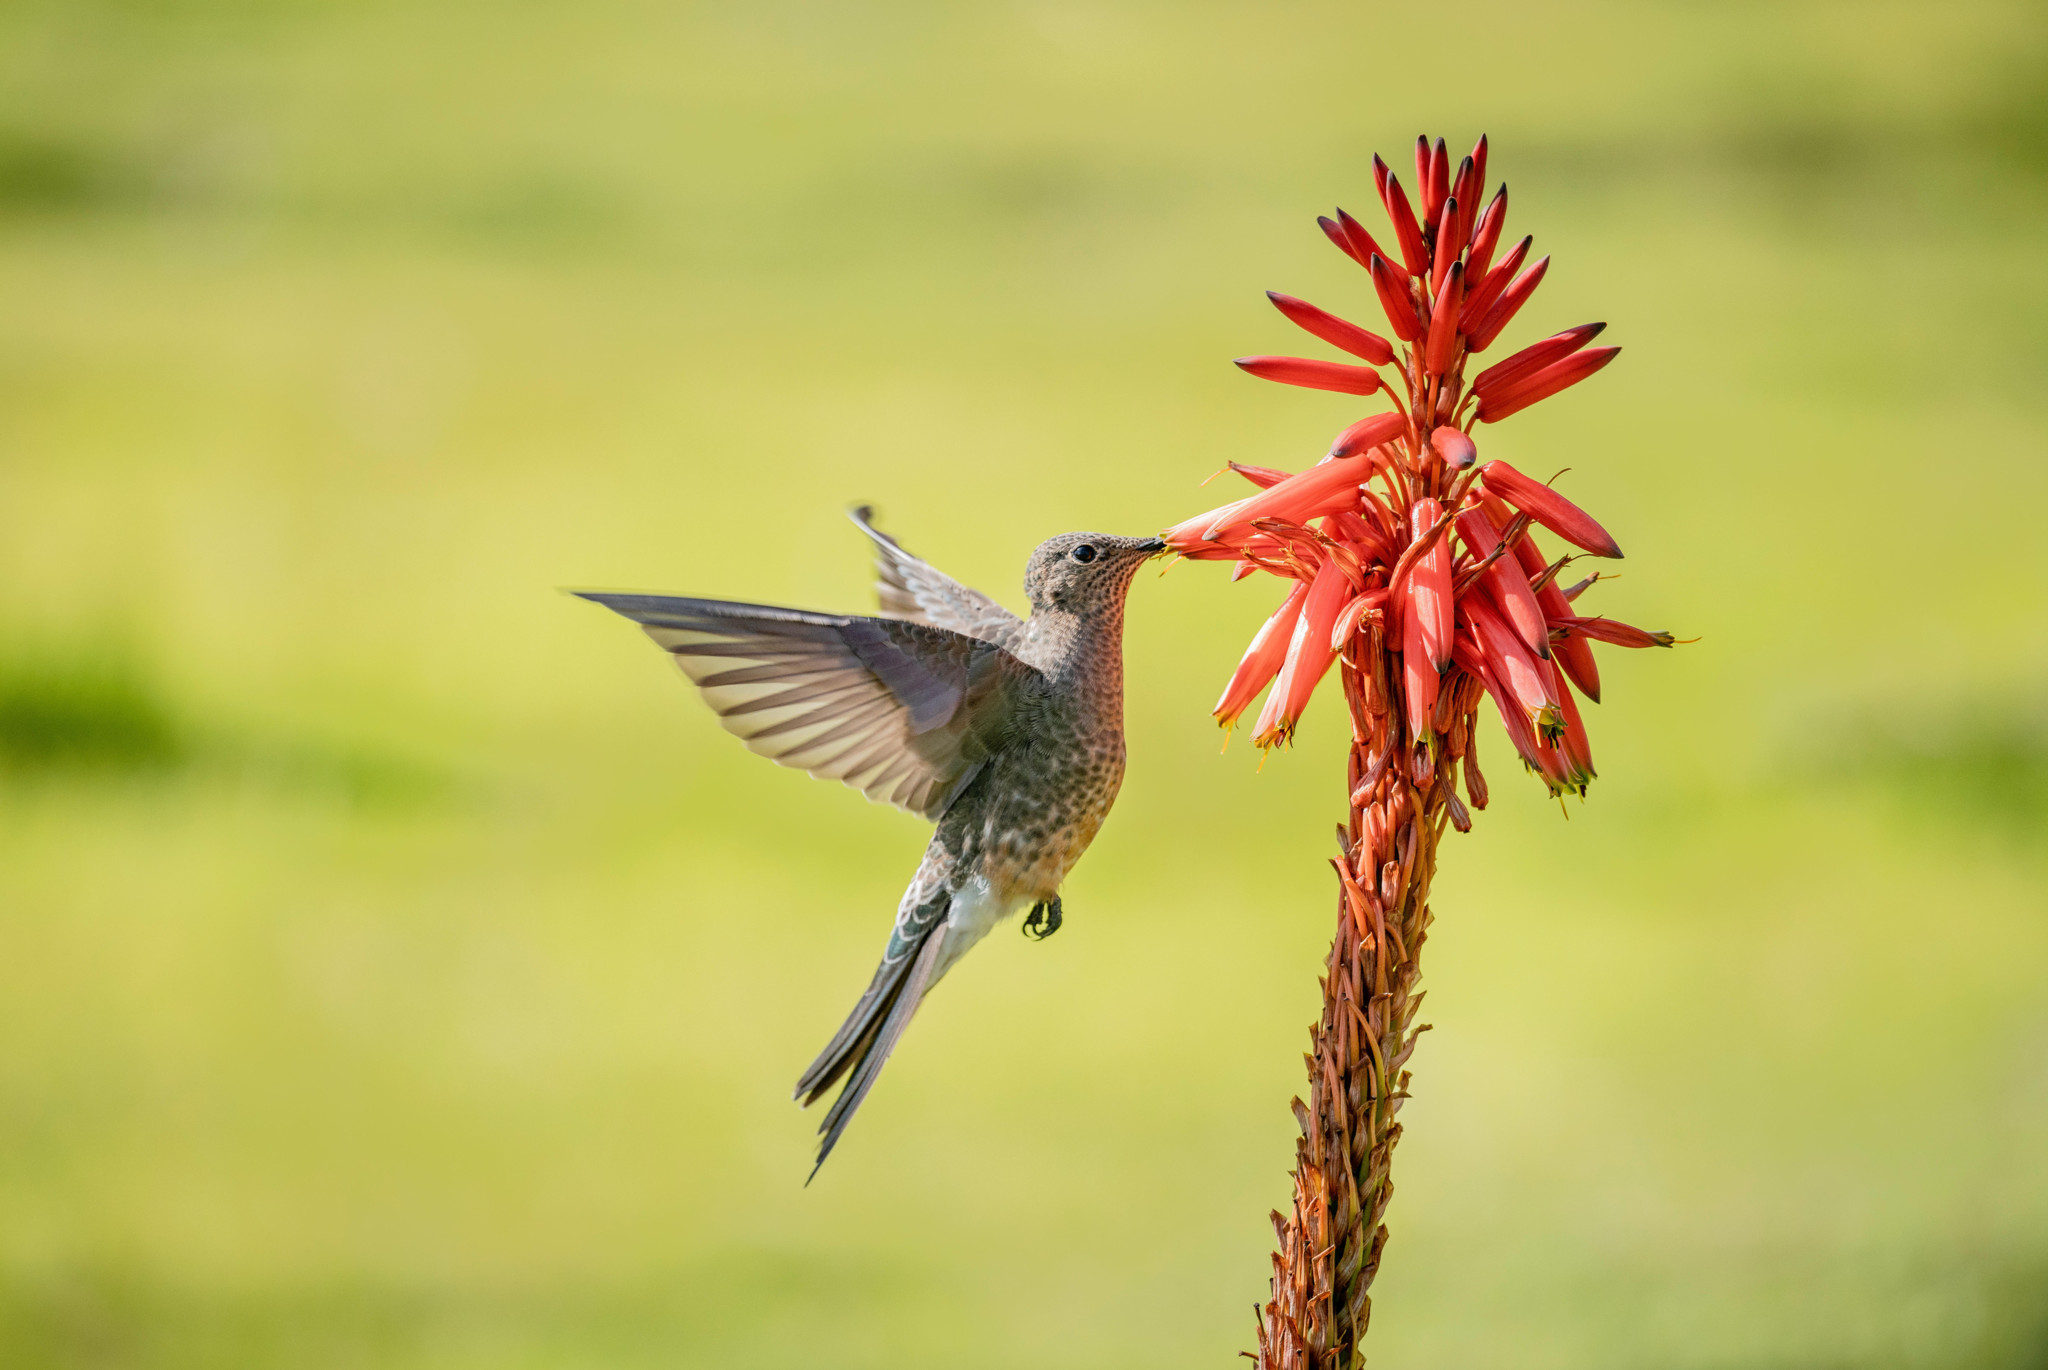 PDXW4A A Giant Humming Bird or Picaflor Gigante aka Patagona Gigas flying and eating the flower of an Aloe Vera plant in the Cordillera de la Coasta, Chile.